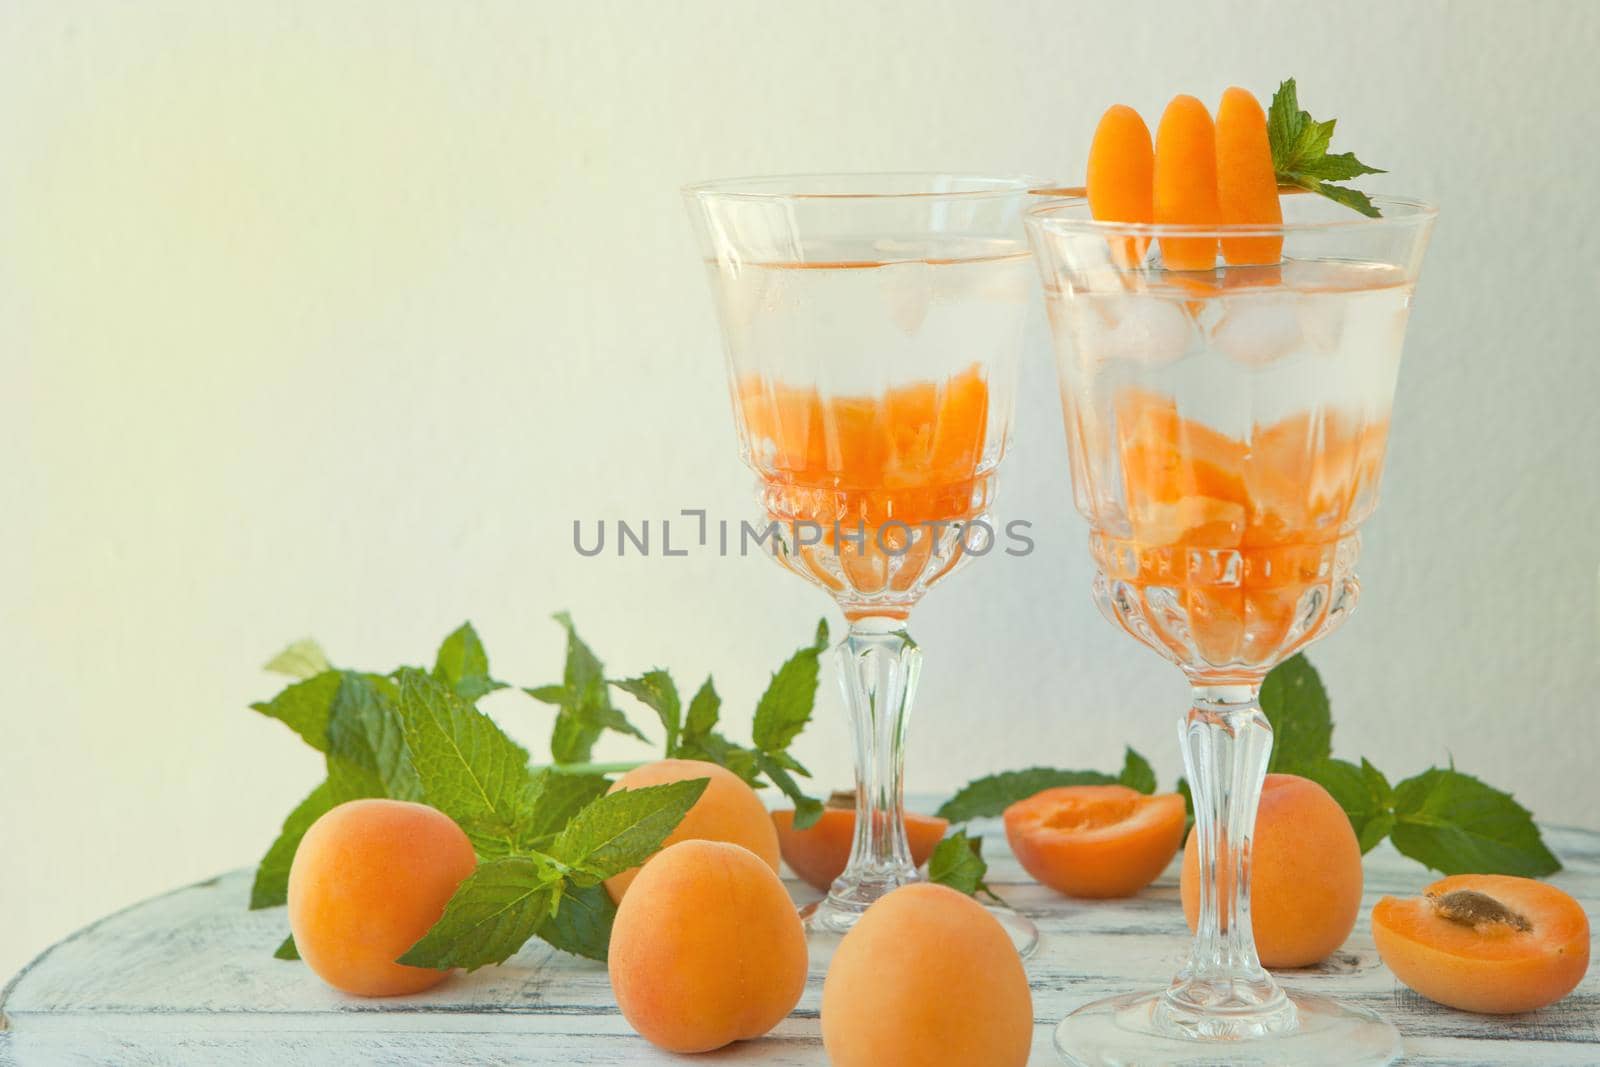 Summer drinks, mint apricot cocktails with ice in glasses. Refreshing summer homemade Alcoholic or non-alcoholic cocktails or Detox infused flavored water by julija